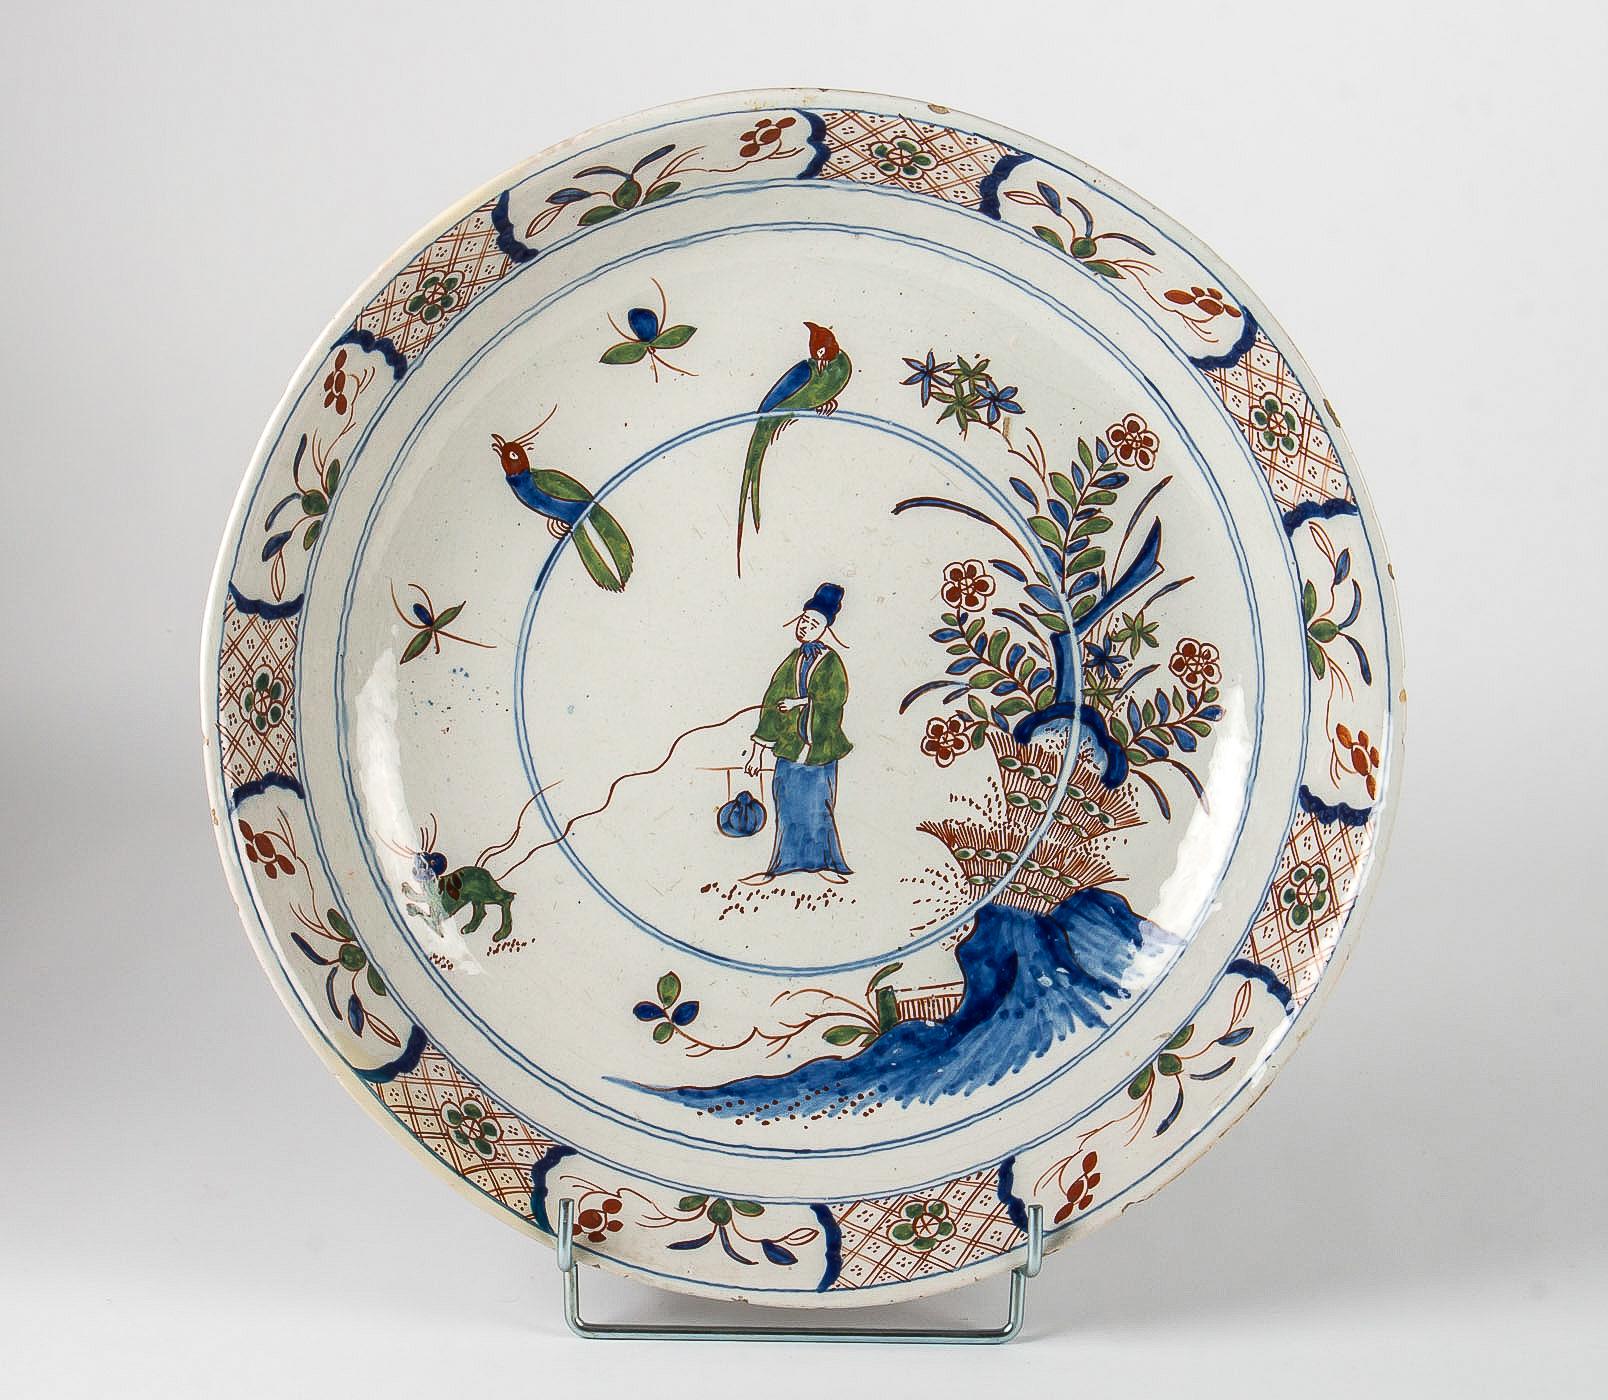 Mid-18th century, large Faience Delft round dish, circa 1720-1750

Magnificent and decorative large Delft polychrome hand painted earthenware round dish, depicting a Chinese man holding a tiger on a leash surrounded by birds and flowers. On the